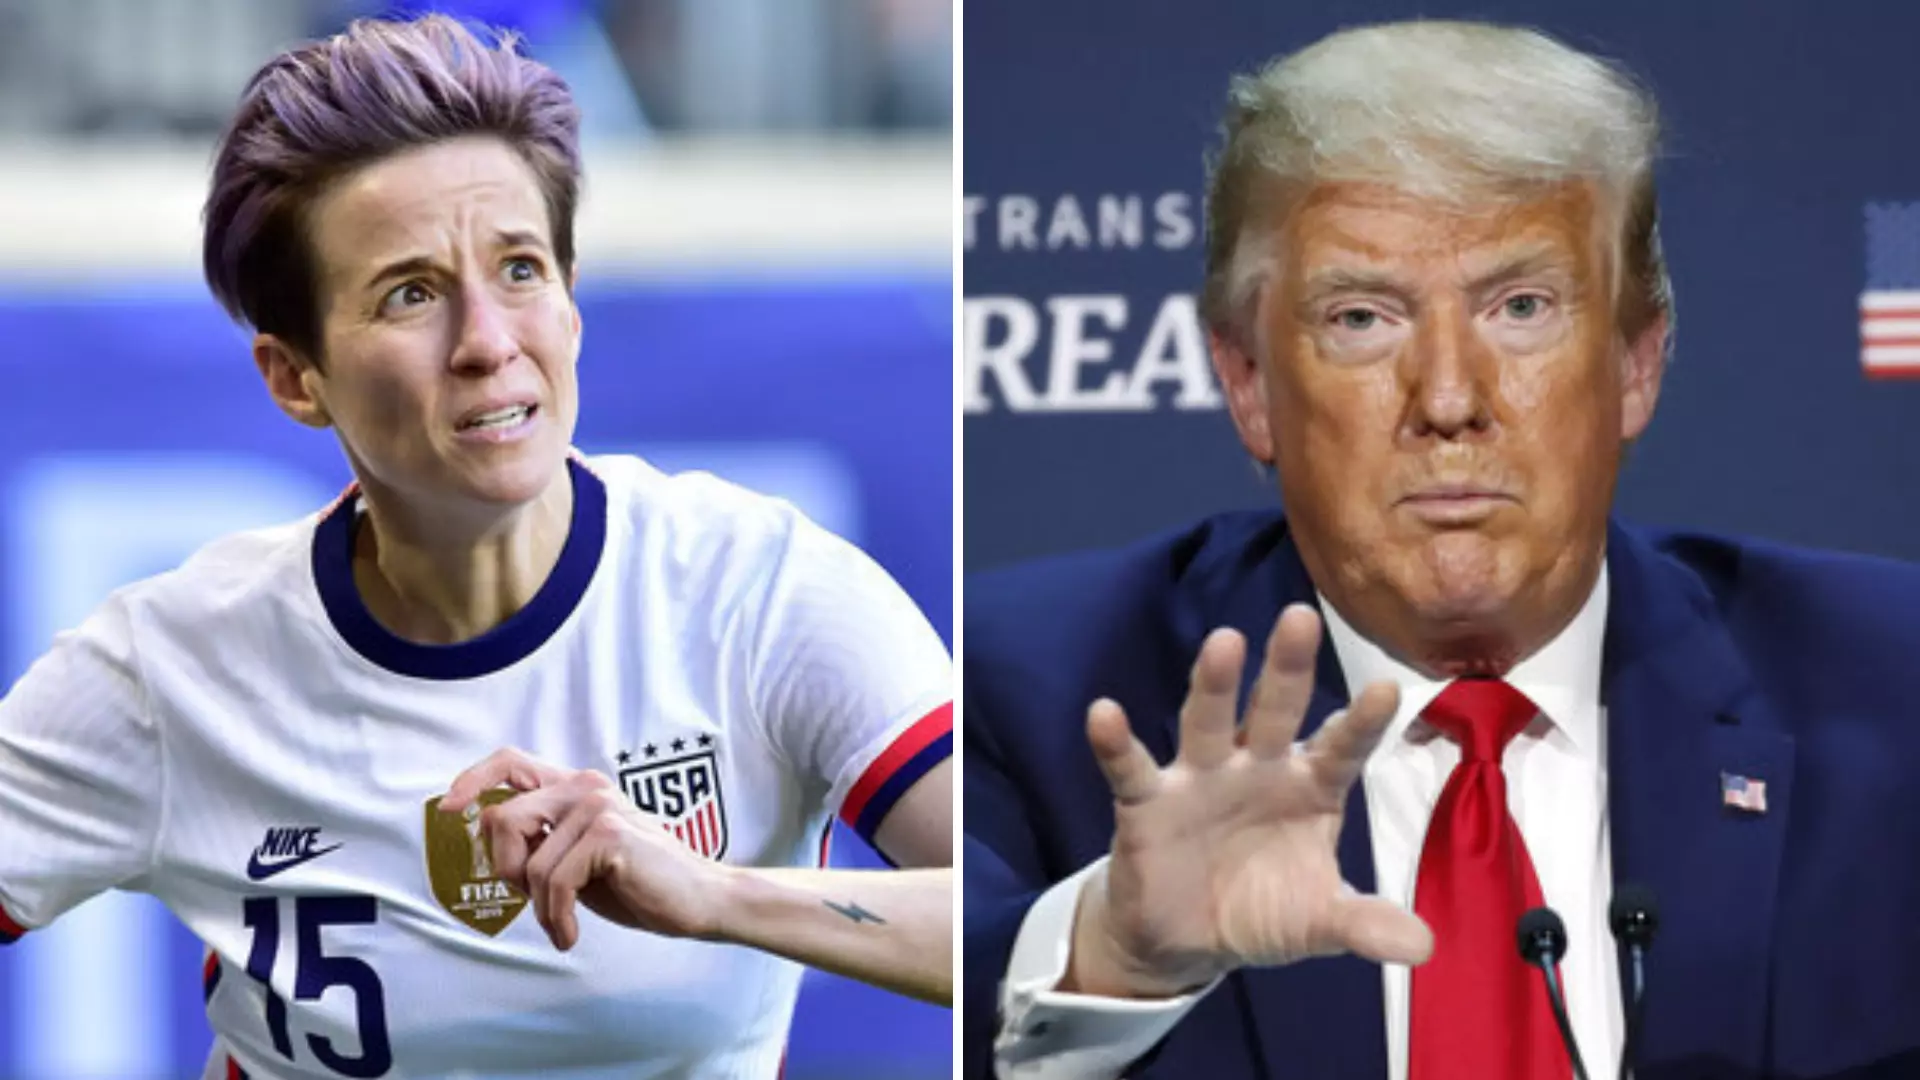 US President Donald Trump Sends Out Warning To US Soccer And NFL Over National Anthem U-Turn